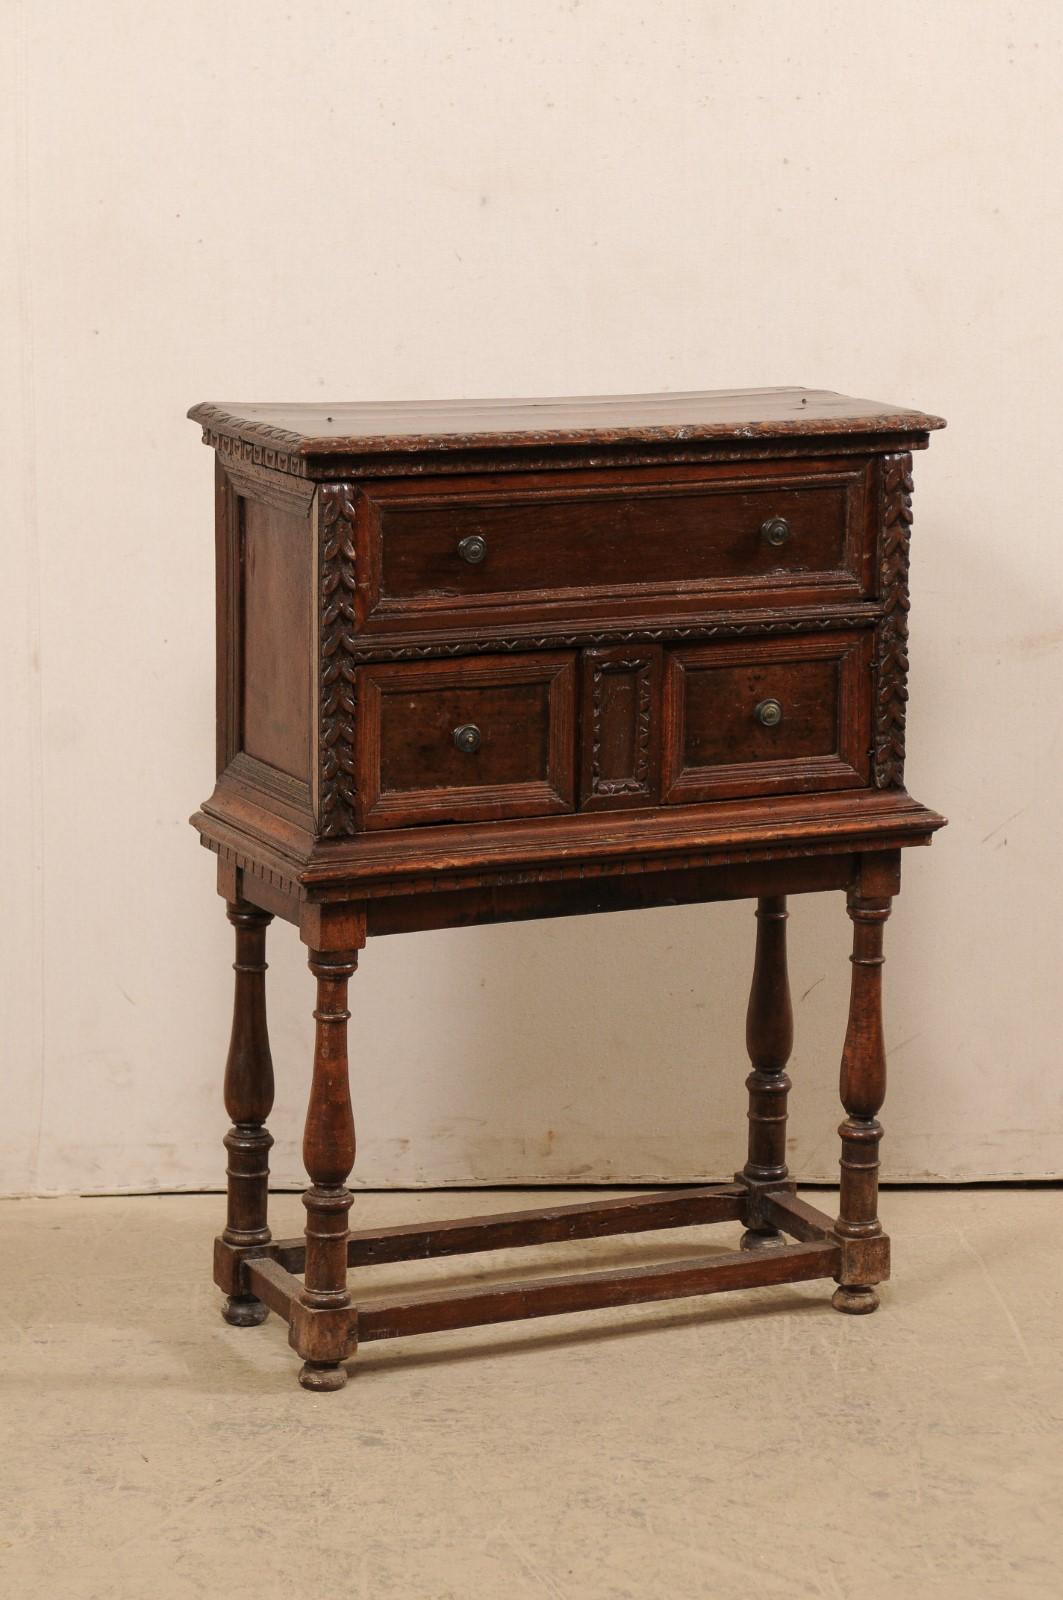 An Italian butler's desk from the 18th century raised on later base. This antique case piece from Italy has the appearance of being a three drawer chest at first glance. However, upon closer inspection, the upper 